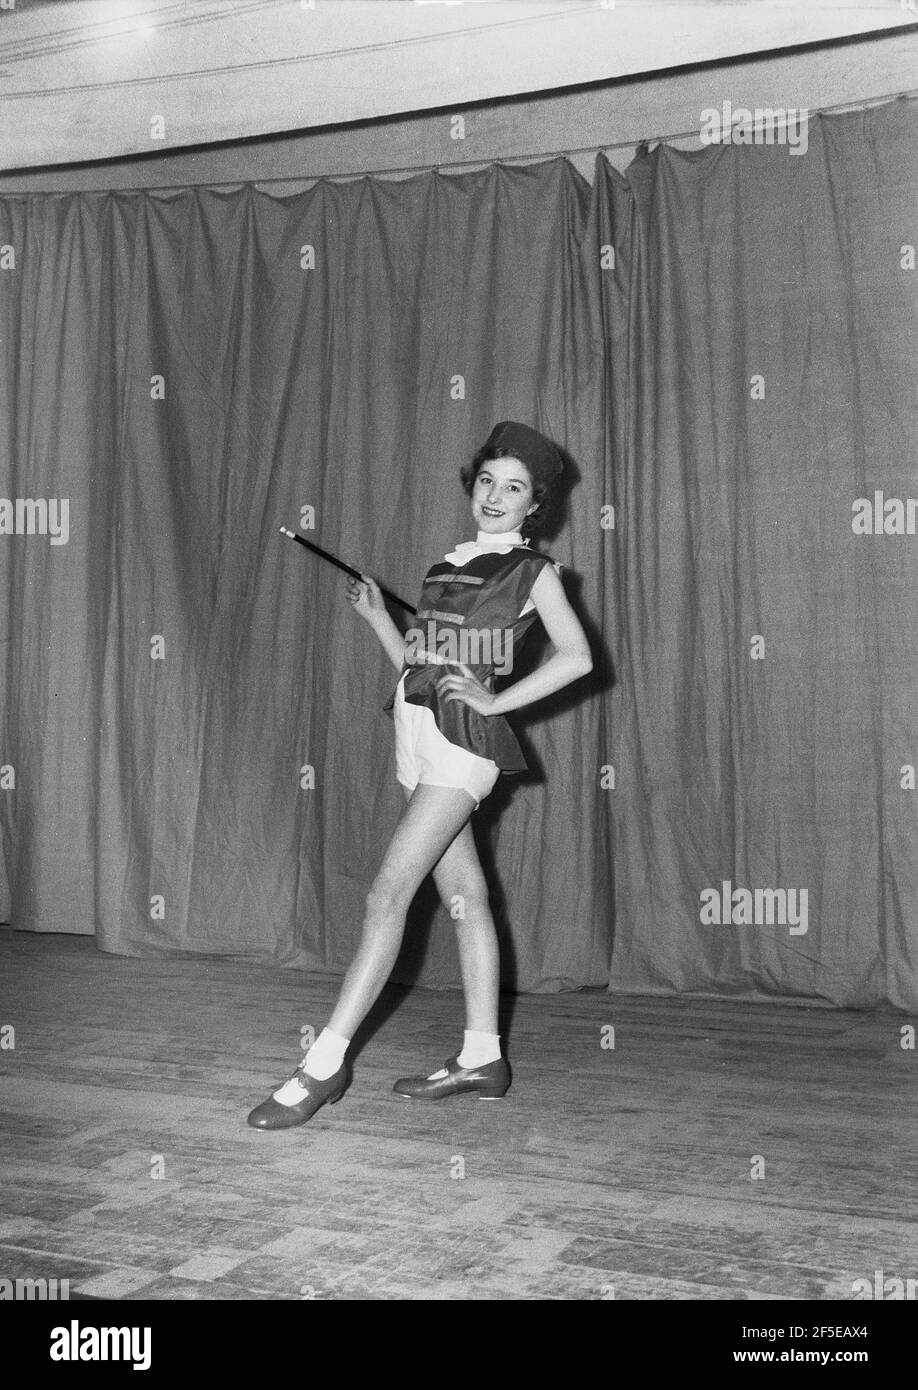 1954, historical, on a stage infront of the curtain wearing her costume and with baton, a young female dancer posing for a photo before performing in the pantomime, 'Mother Goose', England, UK. Originally the imaginary author of a collection of French fairy tales and later of popular English nursery rhymes, it is said that the character first appeared in 1806 as the performance, 'Harlequin and Mother Goose or The Golden Egg'. Different pantomime adaptions of the Mother Goose story took place in the 19th and 20th centuries and it has remained a popular family entertainment show ever since. Stock Photo